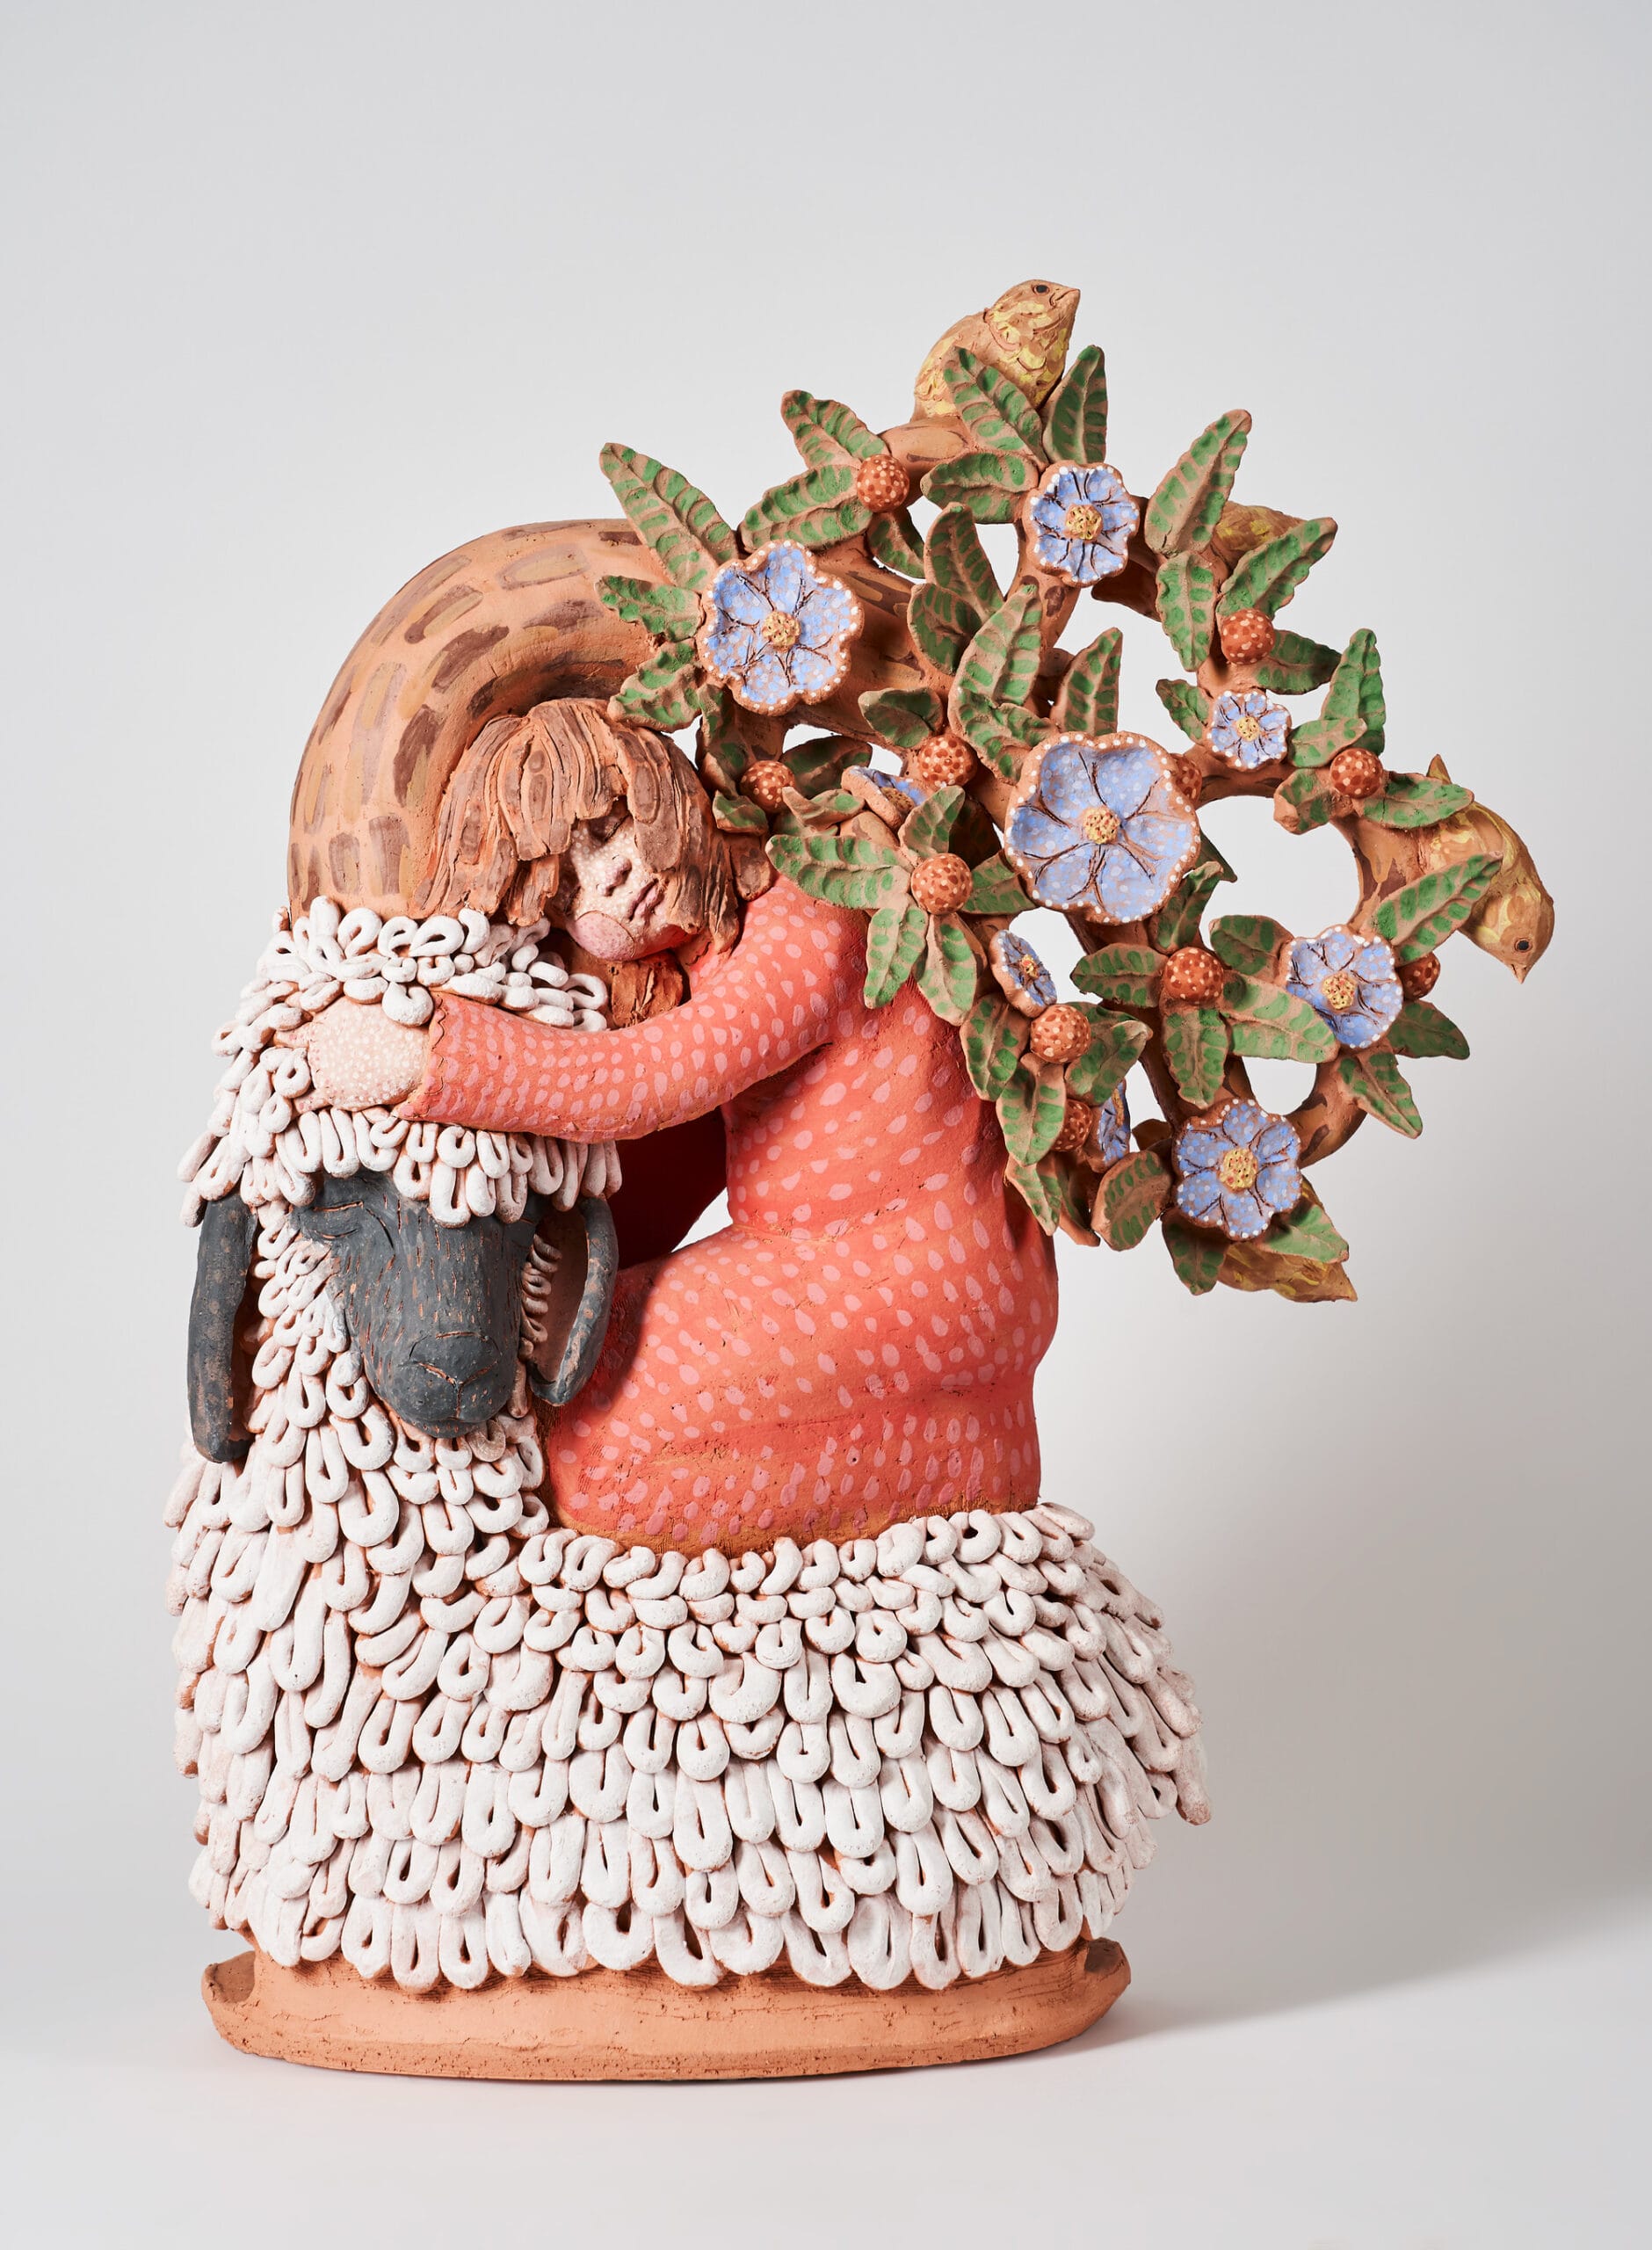 a ceramic sculpture of a young girl embracing a lamb. a tree bends behind them, almost as if it is embracing the small girl as well.